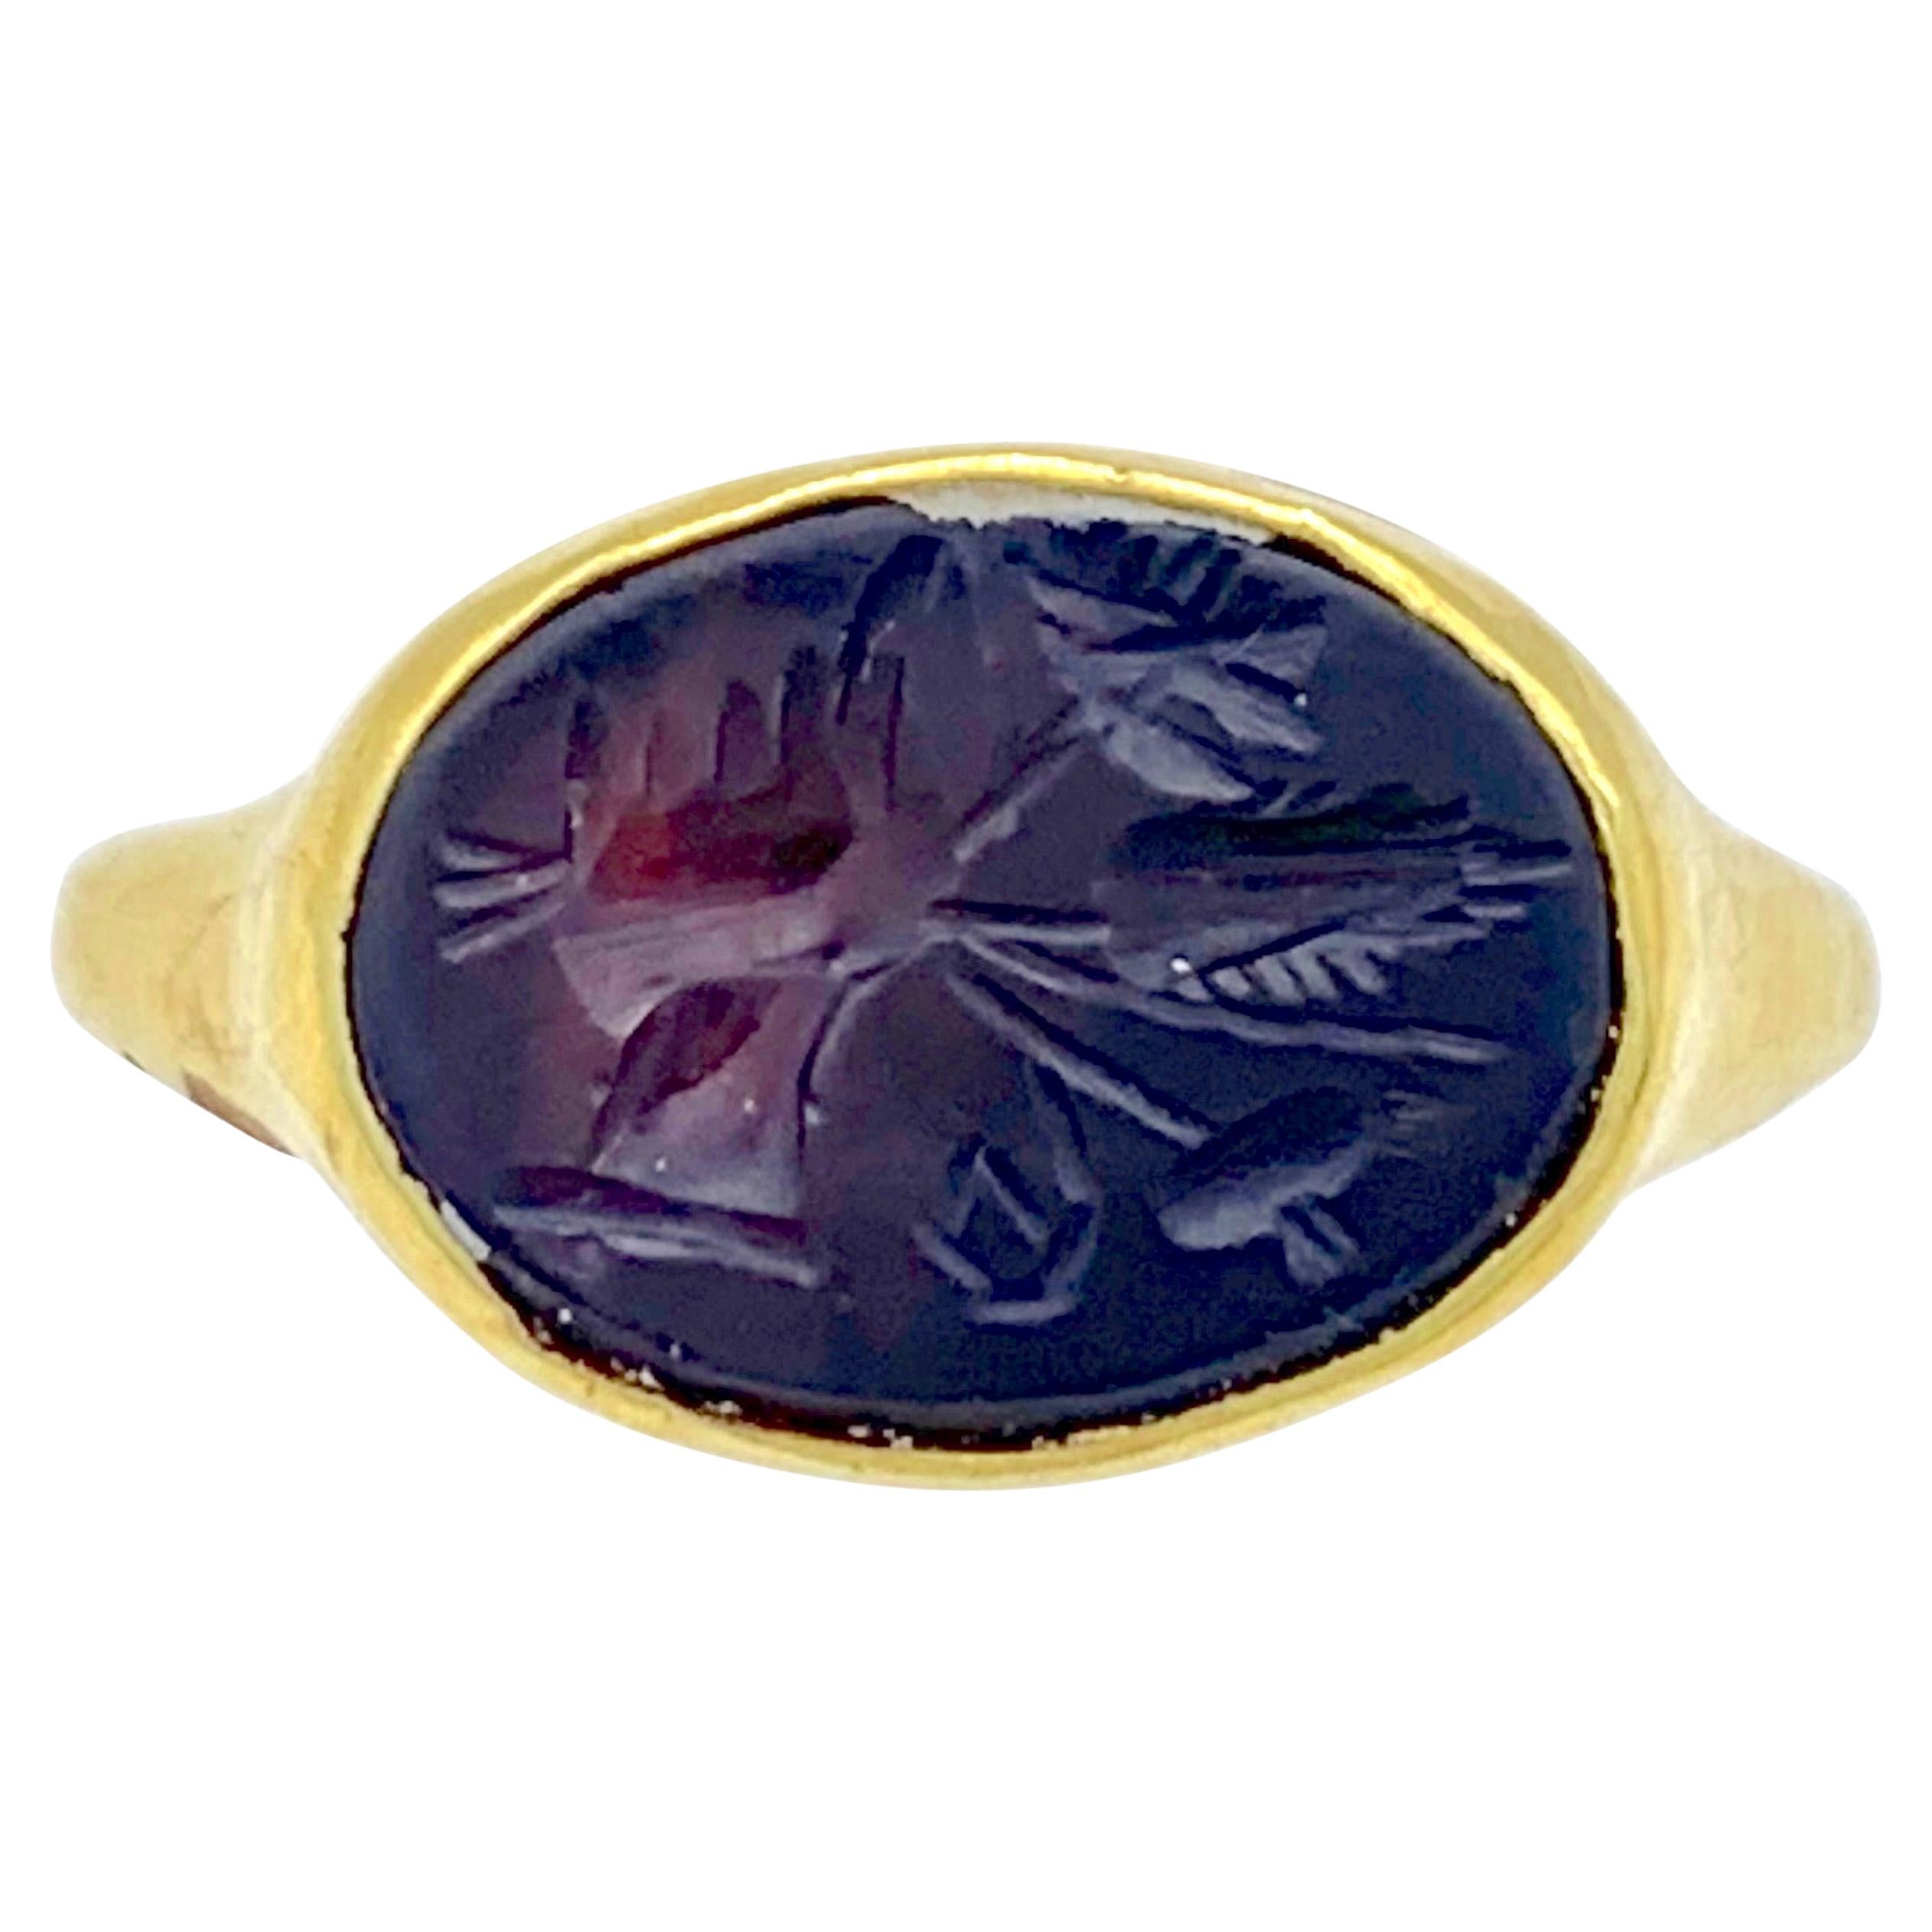 Antique Roman Agate Intaglio Ring Gold Symbol of Fortune and Good Luck